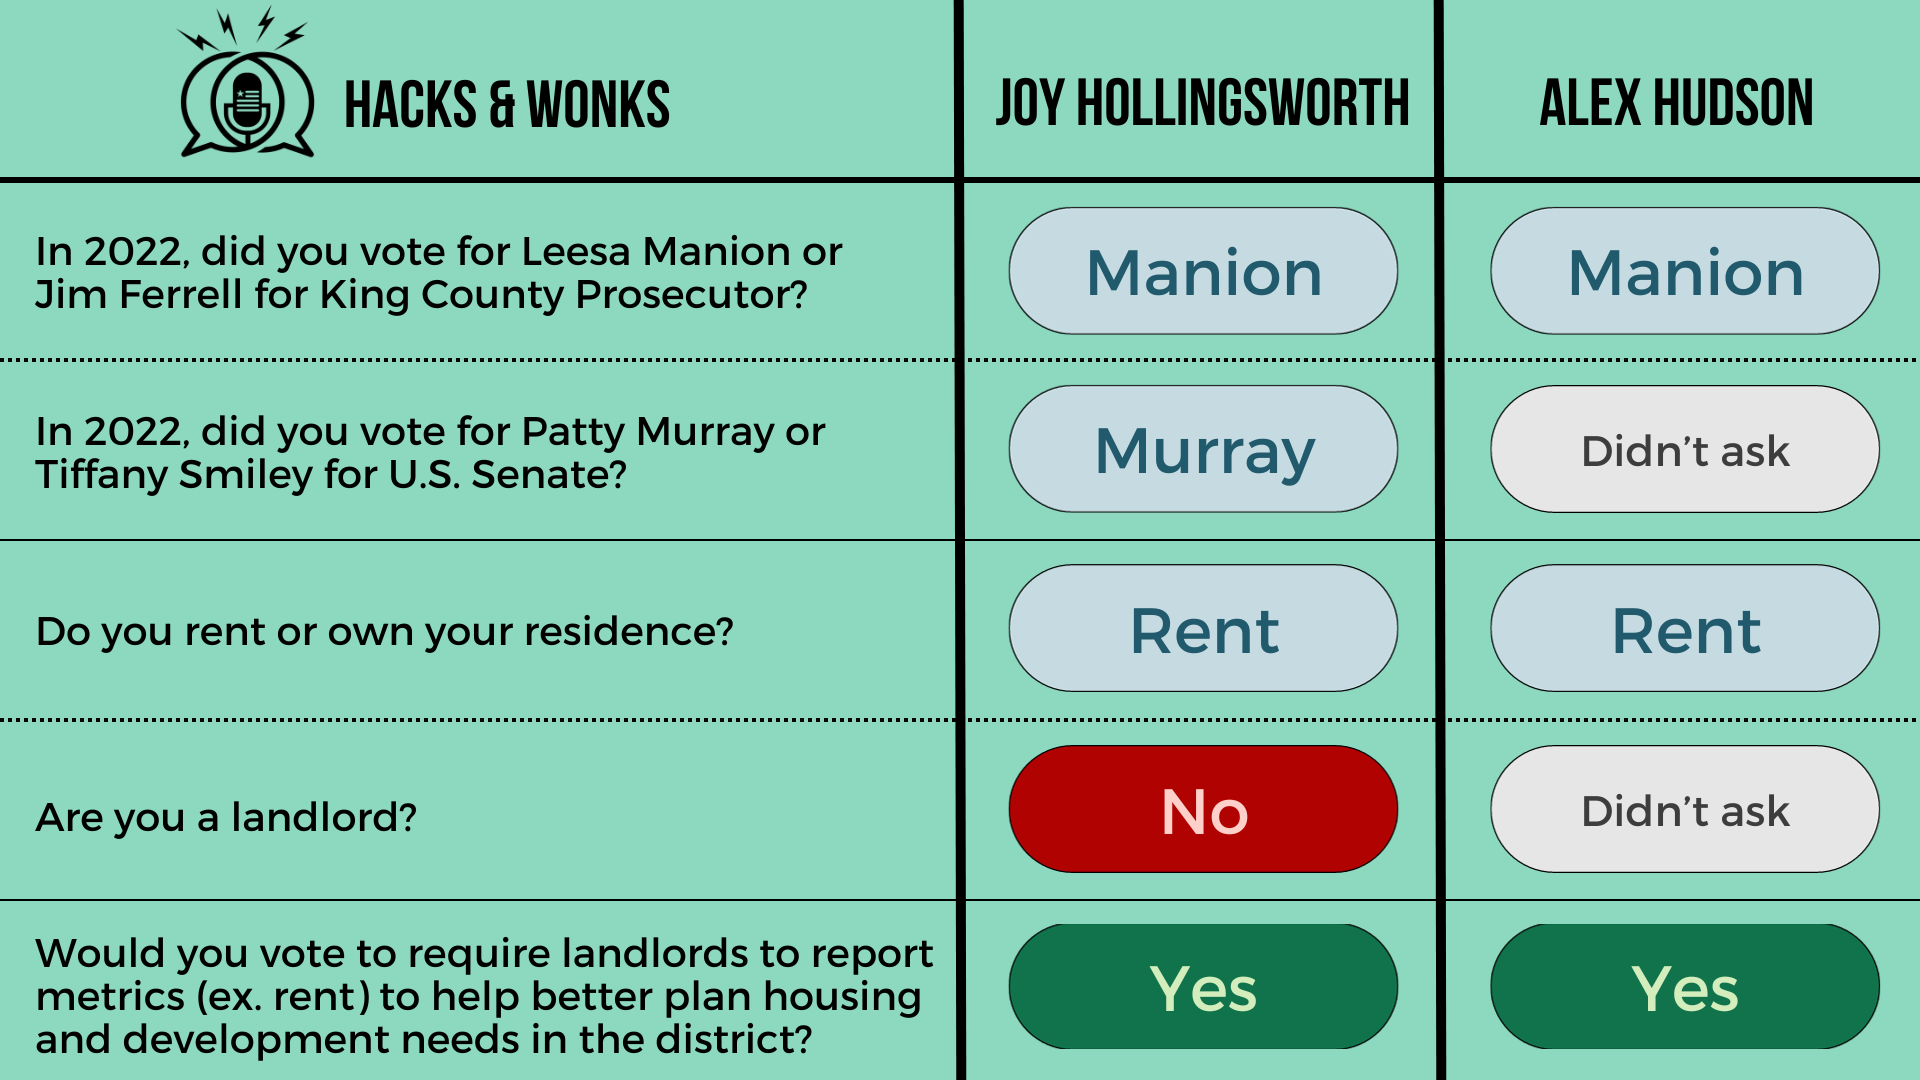 Q: In 2022, did you vote for Leesa Manion or Jim Ferrell for King County Prosecutor? Joy Hollingsworth: Manion, Alex Hudson: Manion  Q: In 2022, did you vote for Patty Murray or Tiffany Smiley for U.S. Senate? Joy Hollingsworth: Murray, Alex Hudson: